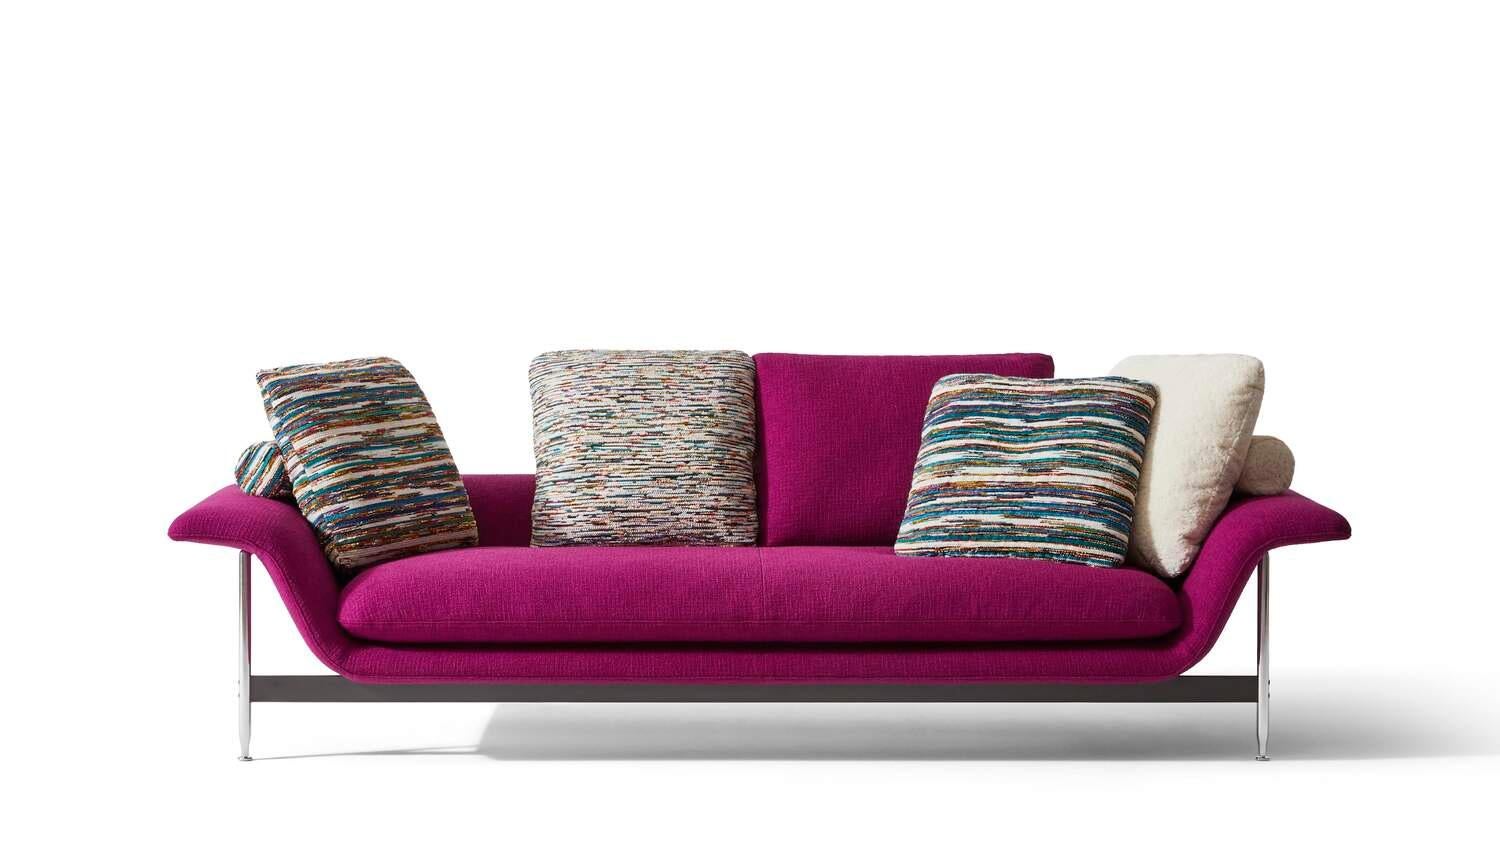 Antonio Citterio Esosoft Sofa
Manufactured by Cassina in Itlay

A living room system designed to define the domestic landscape in a fluid, flexible manner. This is Esosoft ? the first project by Antonio Citterio for Cassina ? a modular sofa that